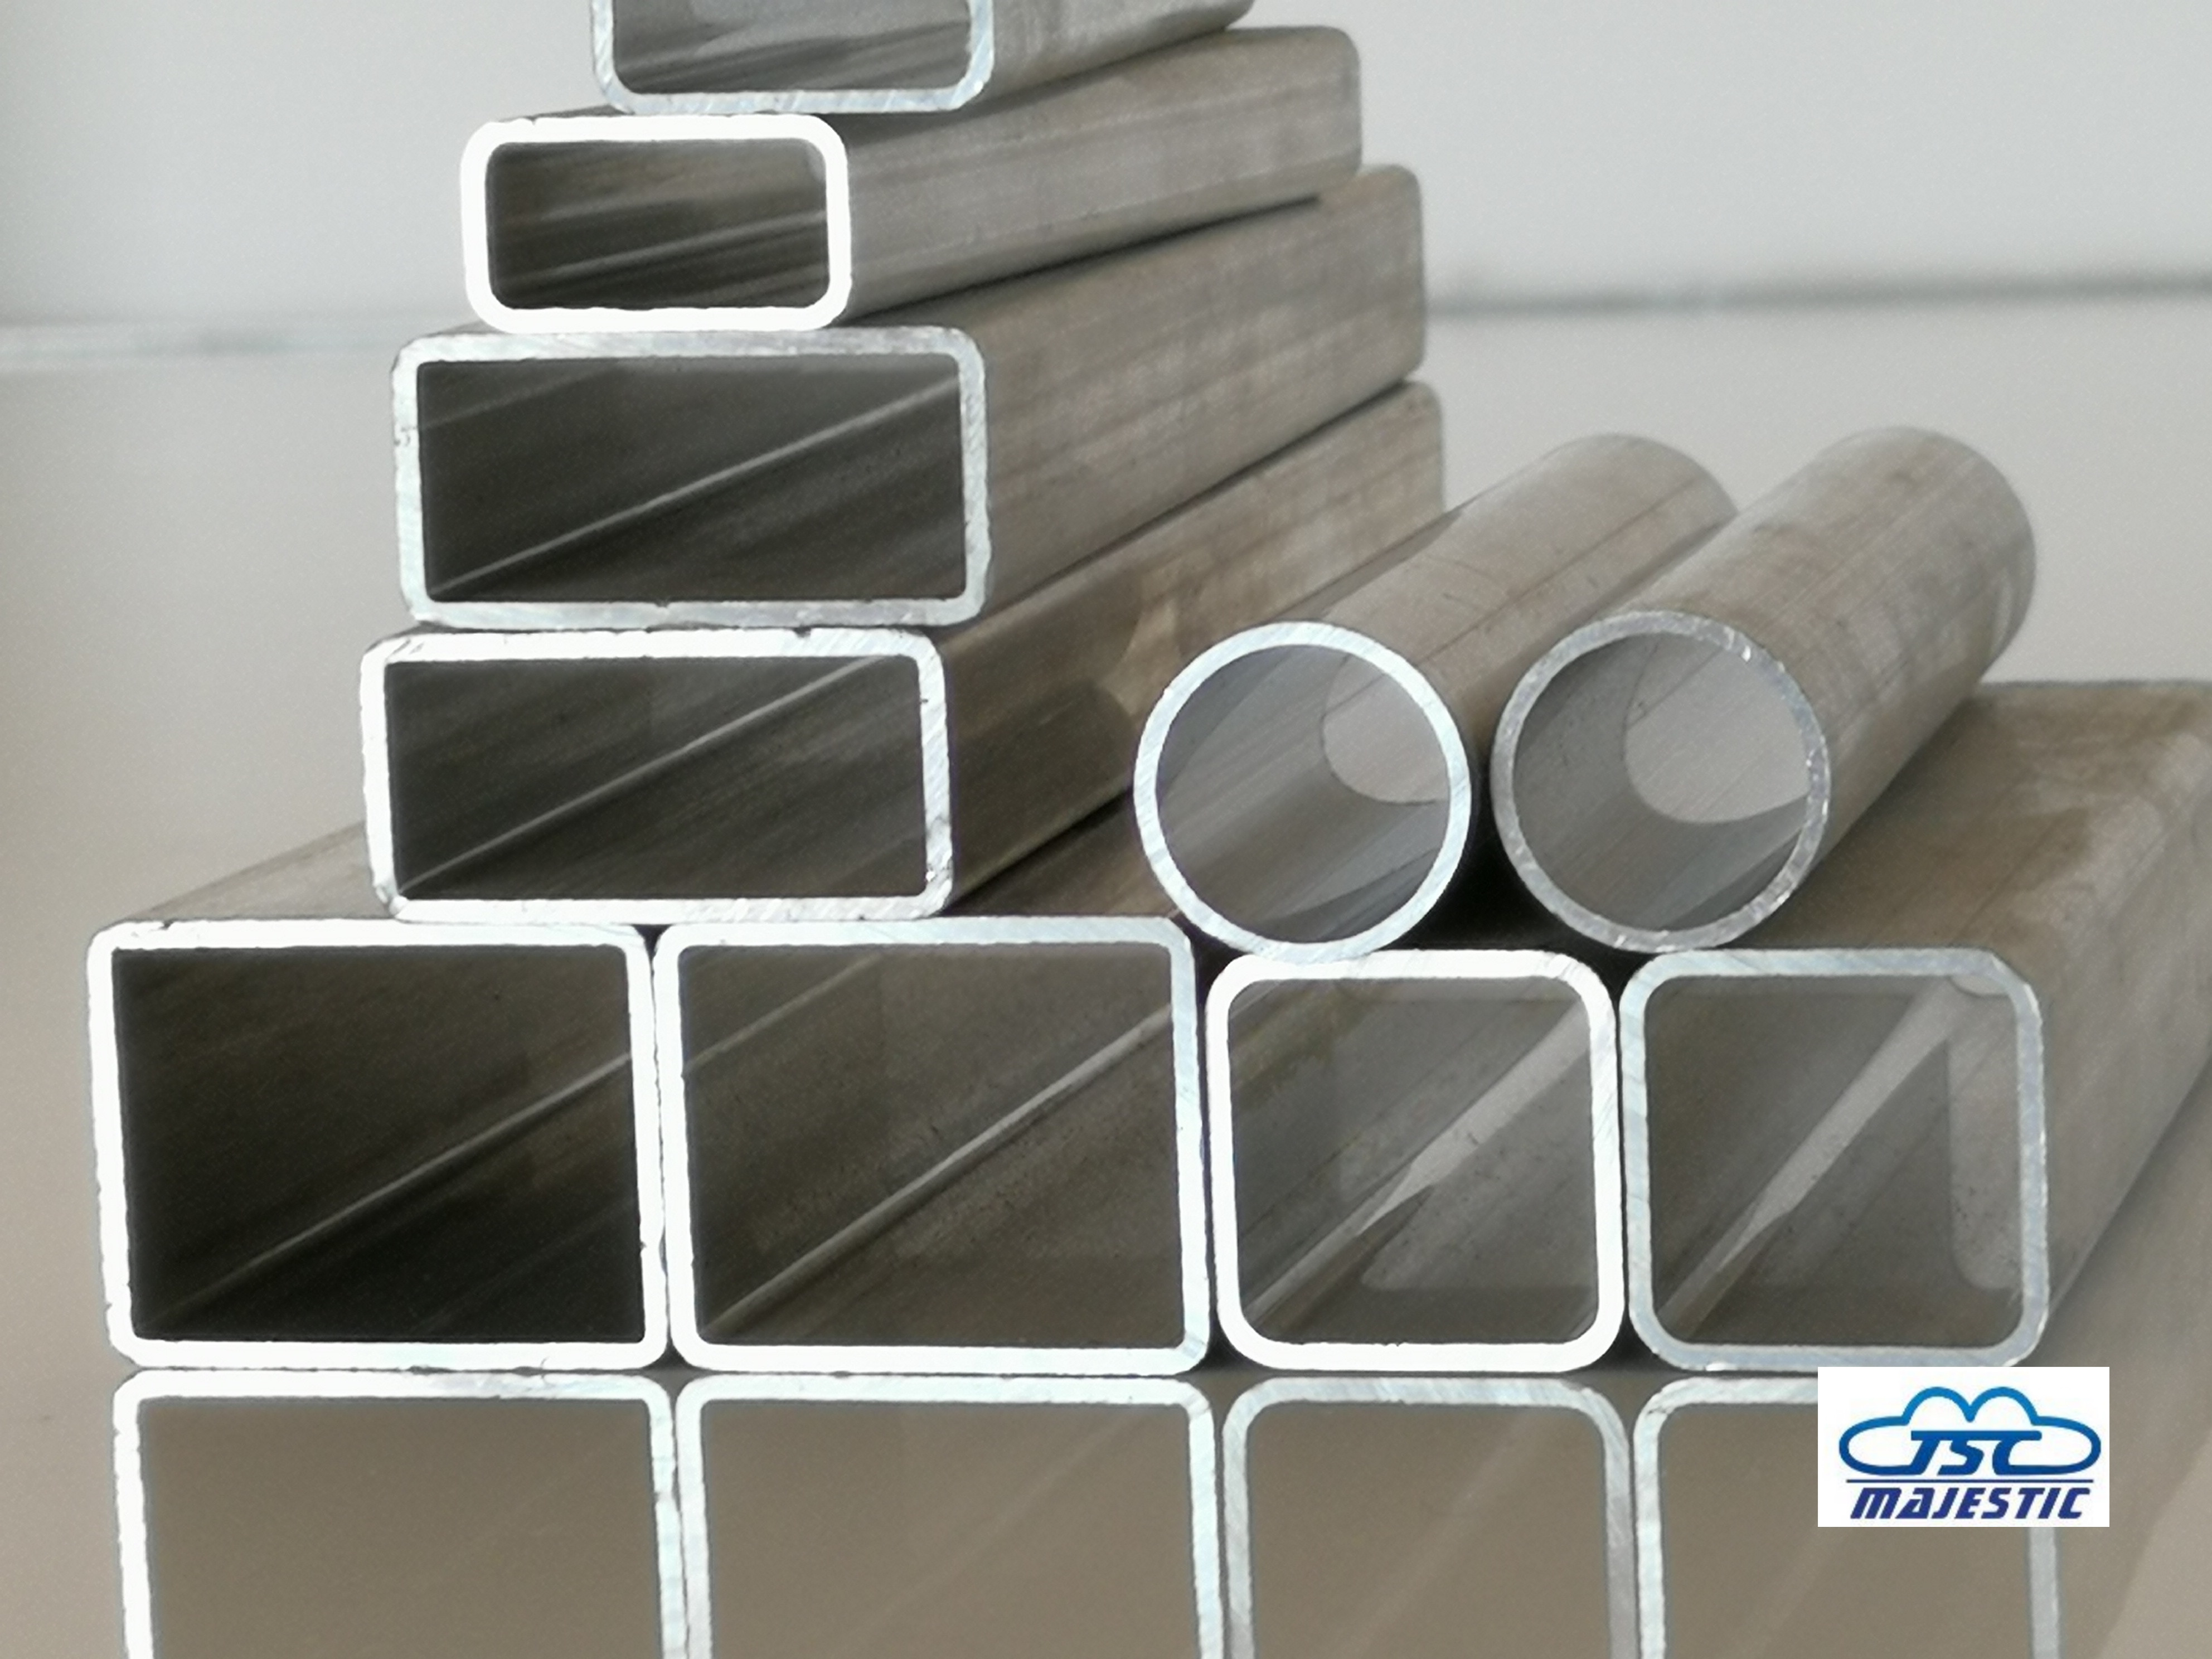 Classification and use of aluminum tubes